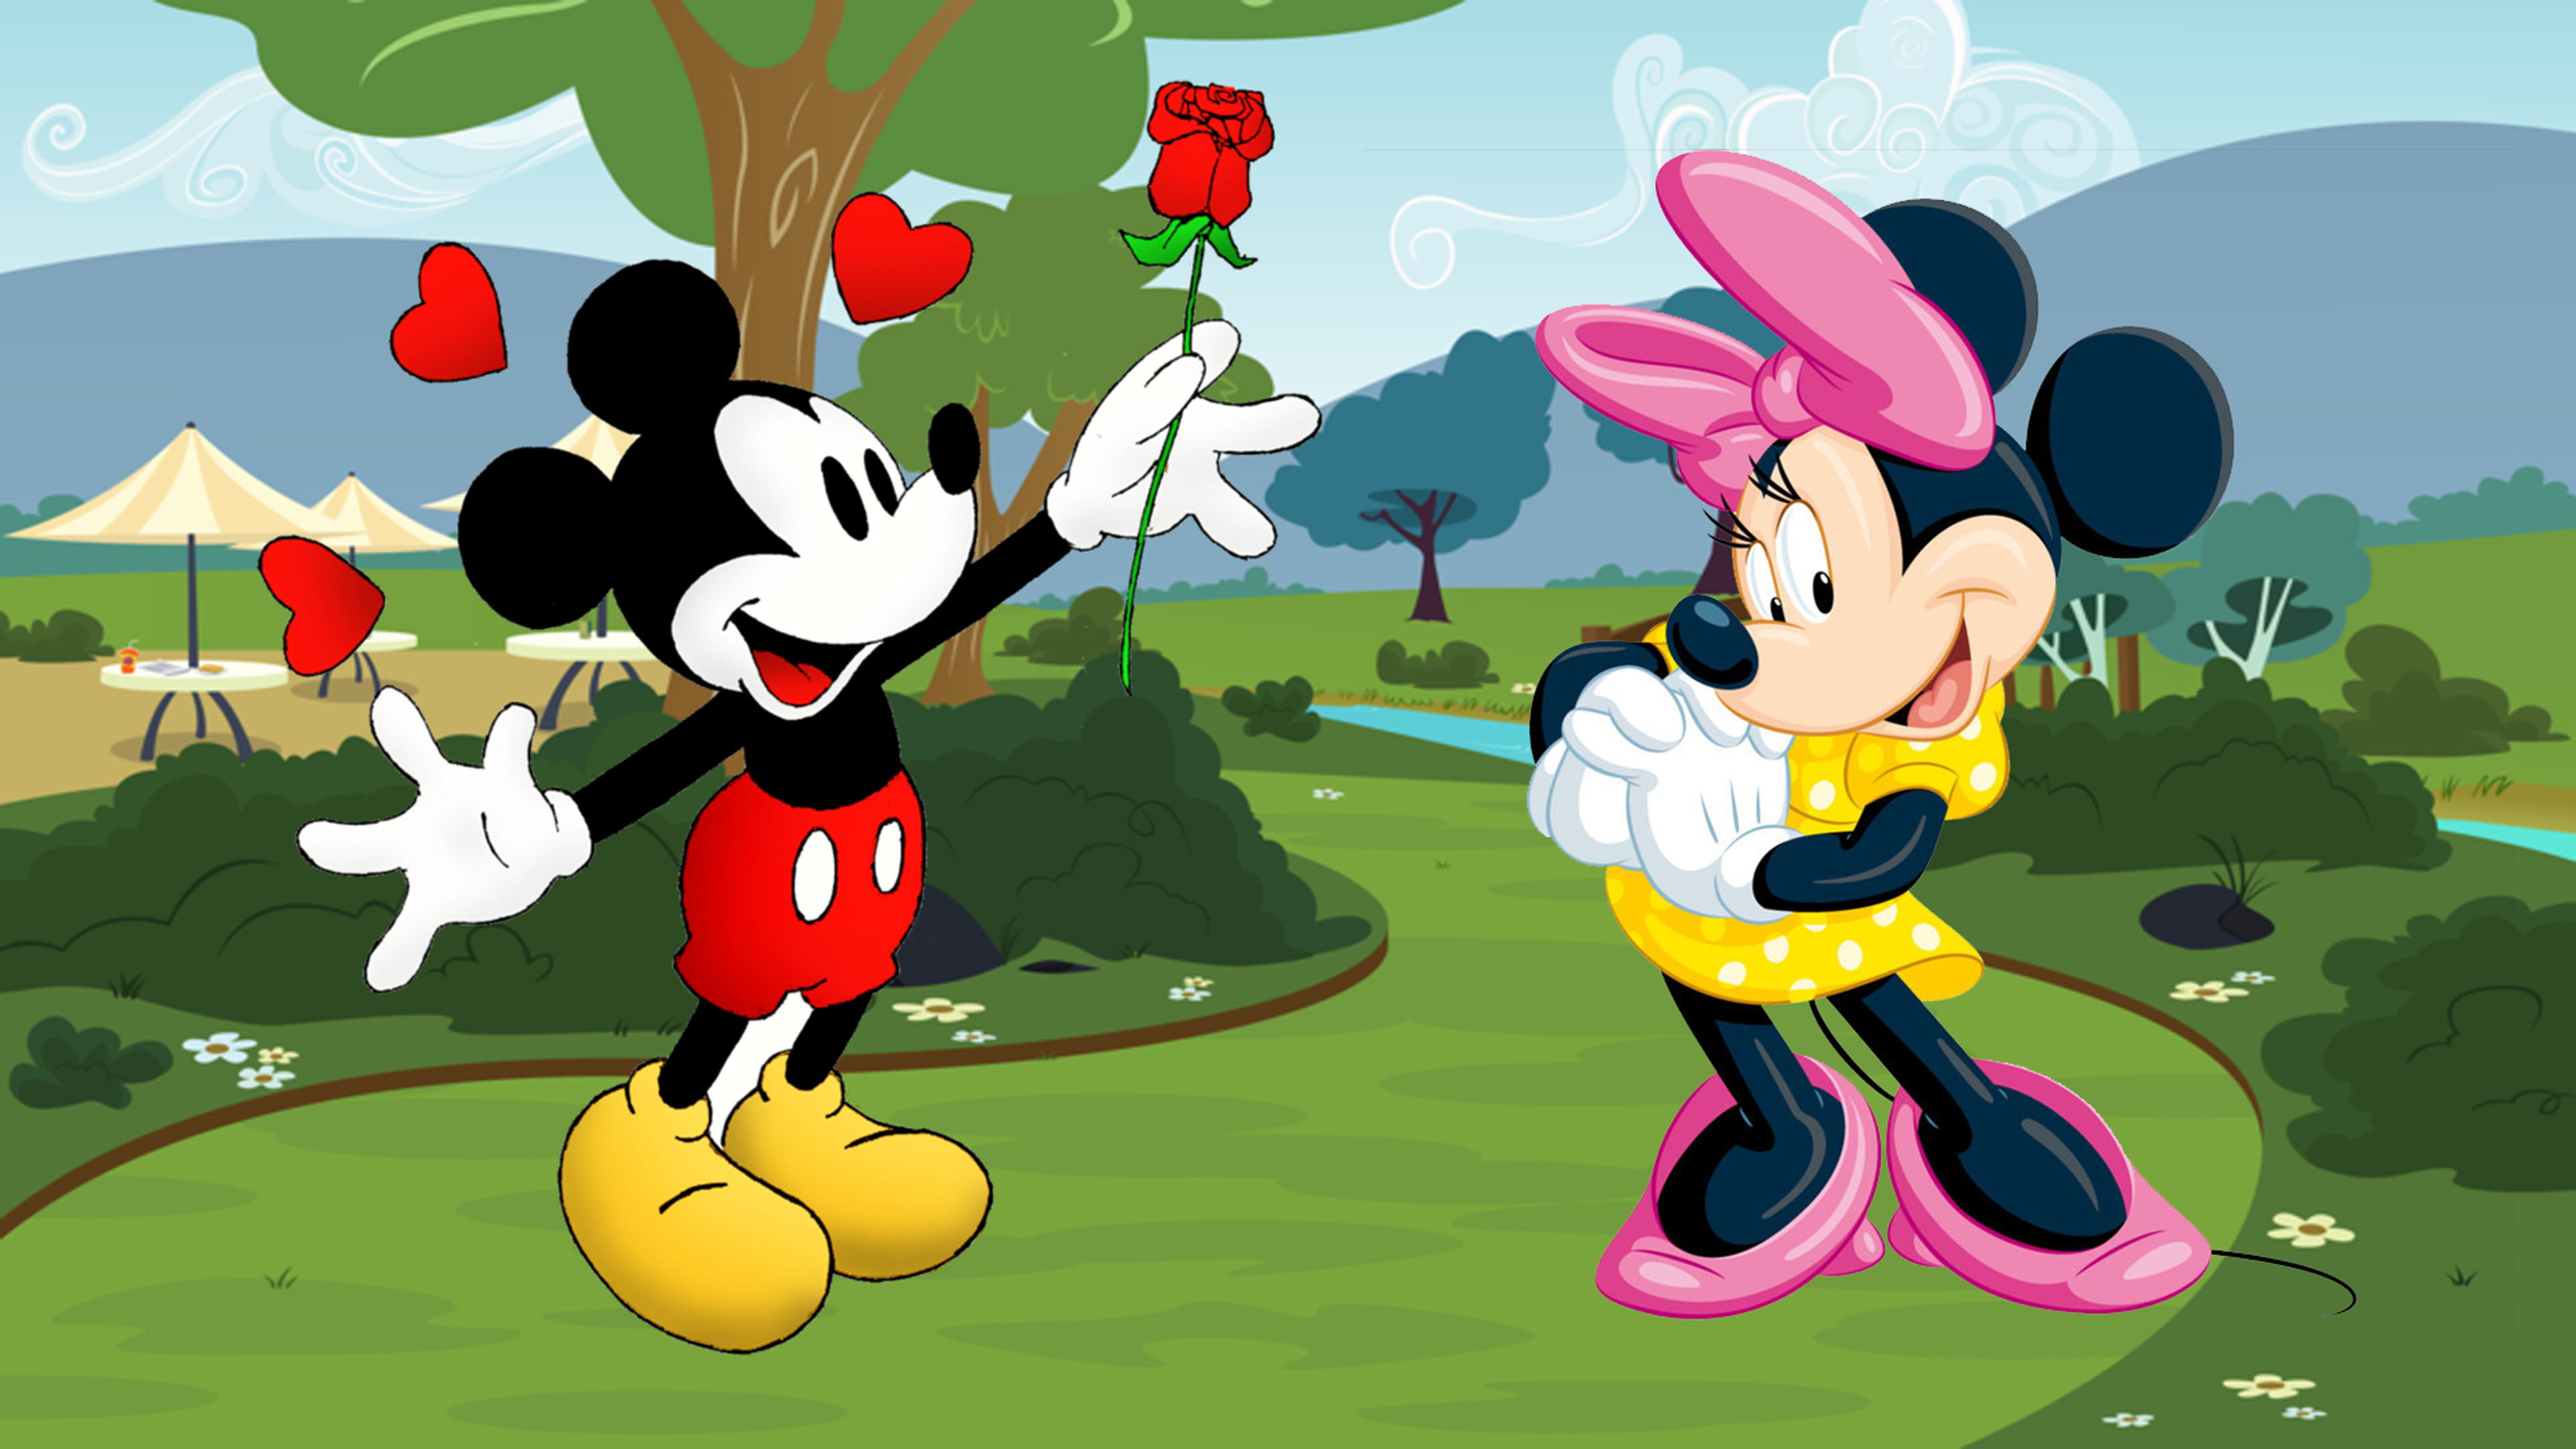 Mickey And Minnie Mouse Cartoon Red Rose For Minnie Love Couple Wallpaper Hd 3840×21600